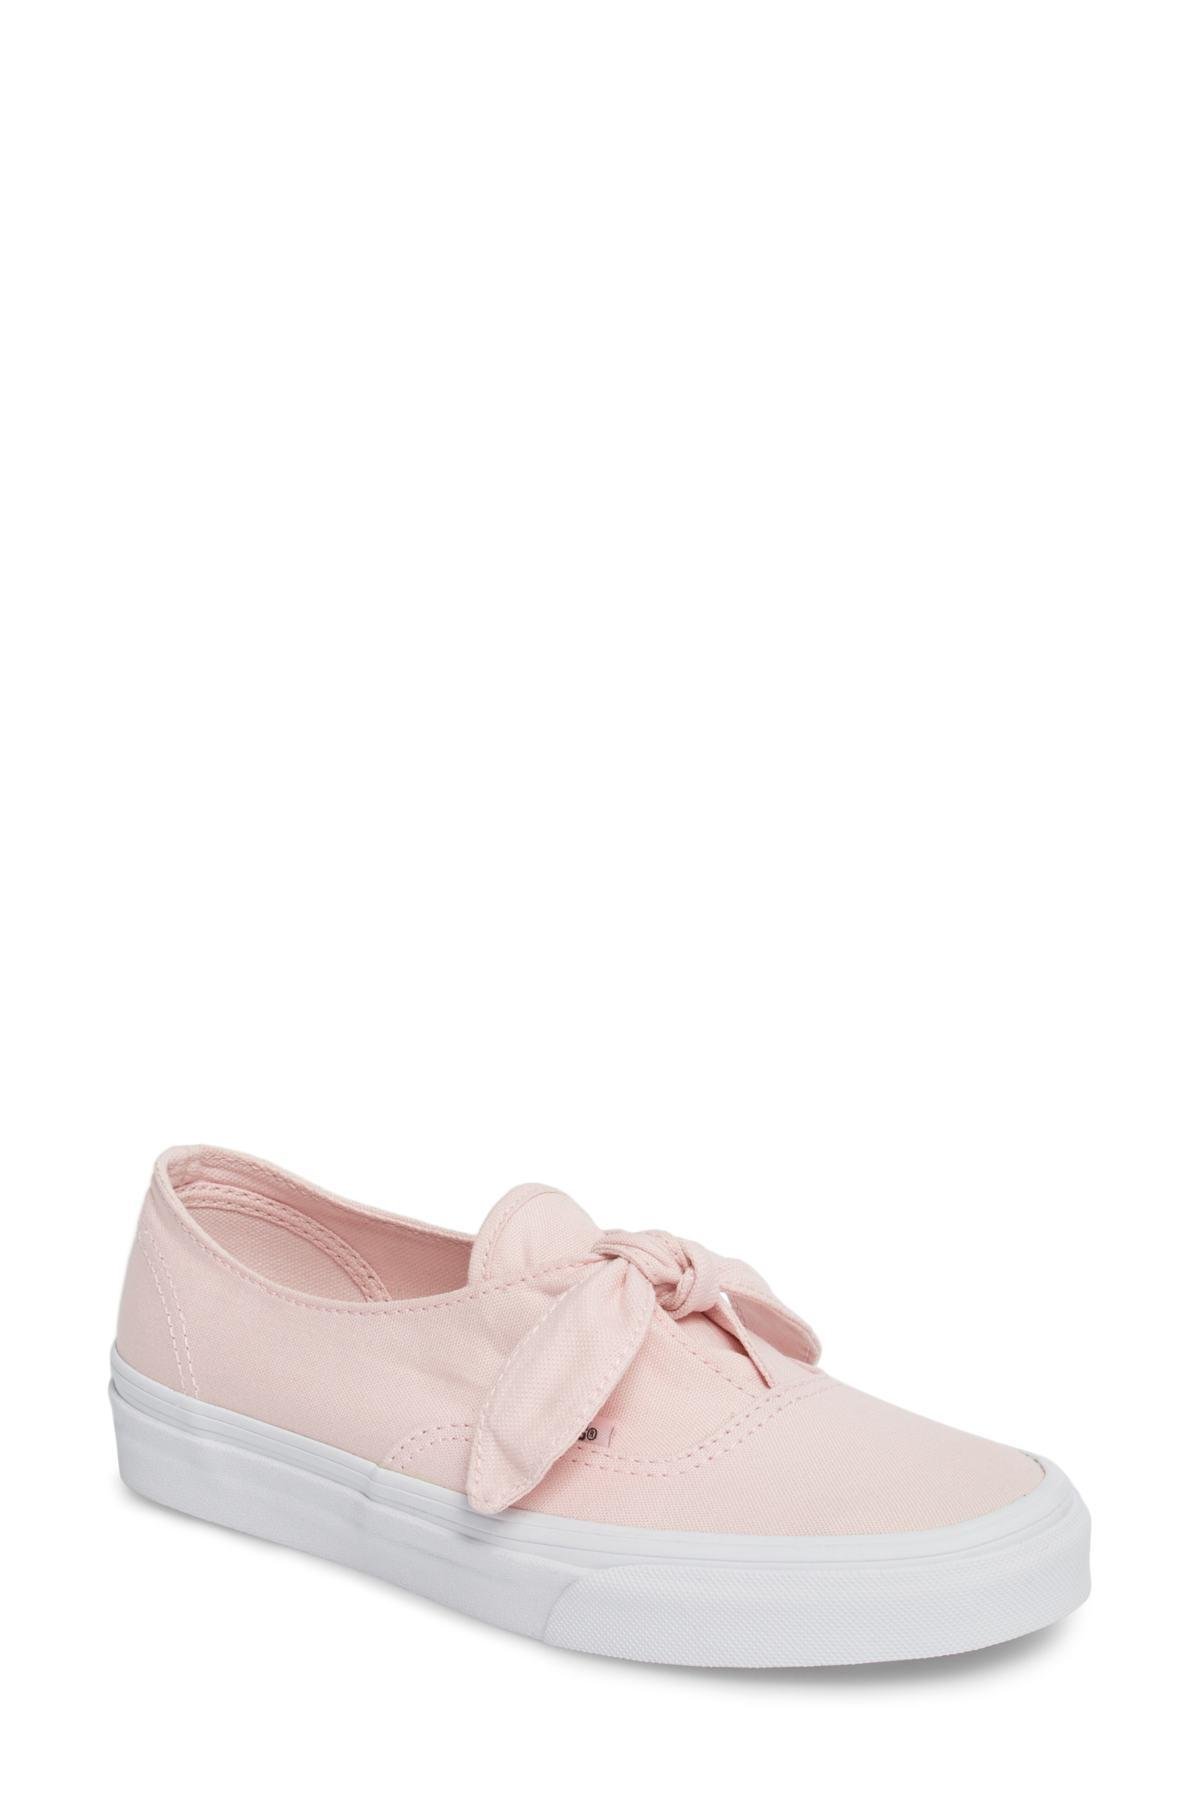 Vans Rubber Ua Authentic Bow Slip-on Sneaker in Pink | Lyst